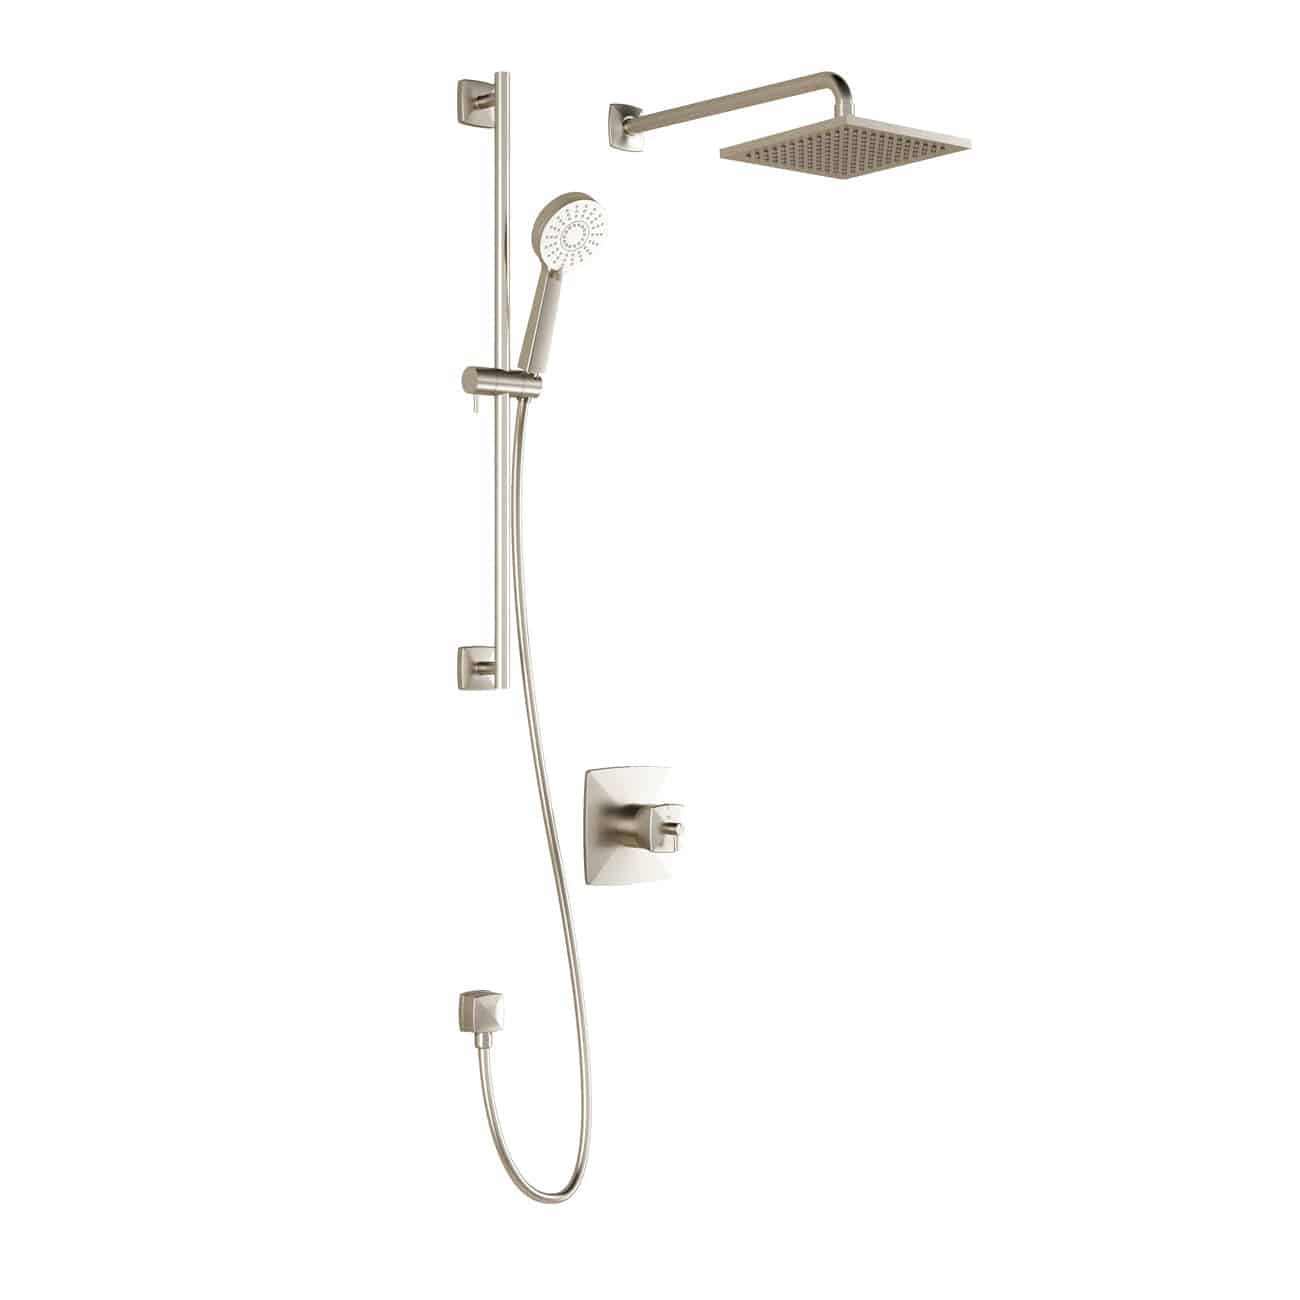 Kalia UMANI TCD1 AQUATONIK T/P Coaxial Shower System with 8" Square Shower Head, Round Hand Shower and Wall Arm Brushed Nickel PVD